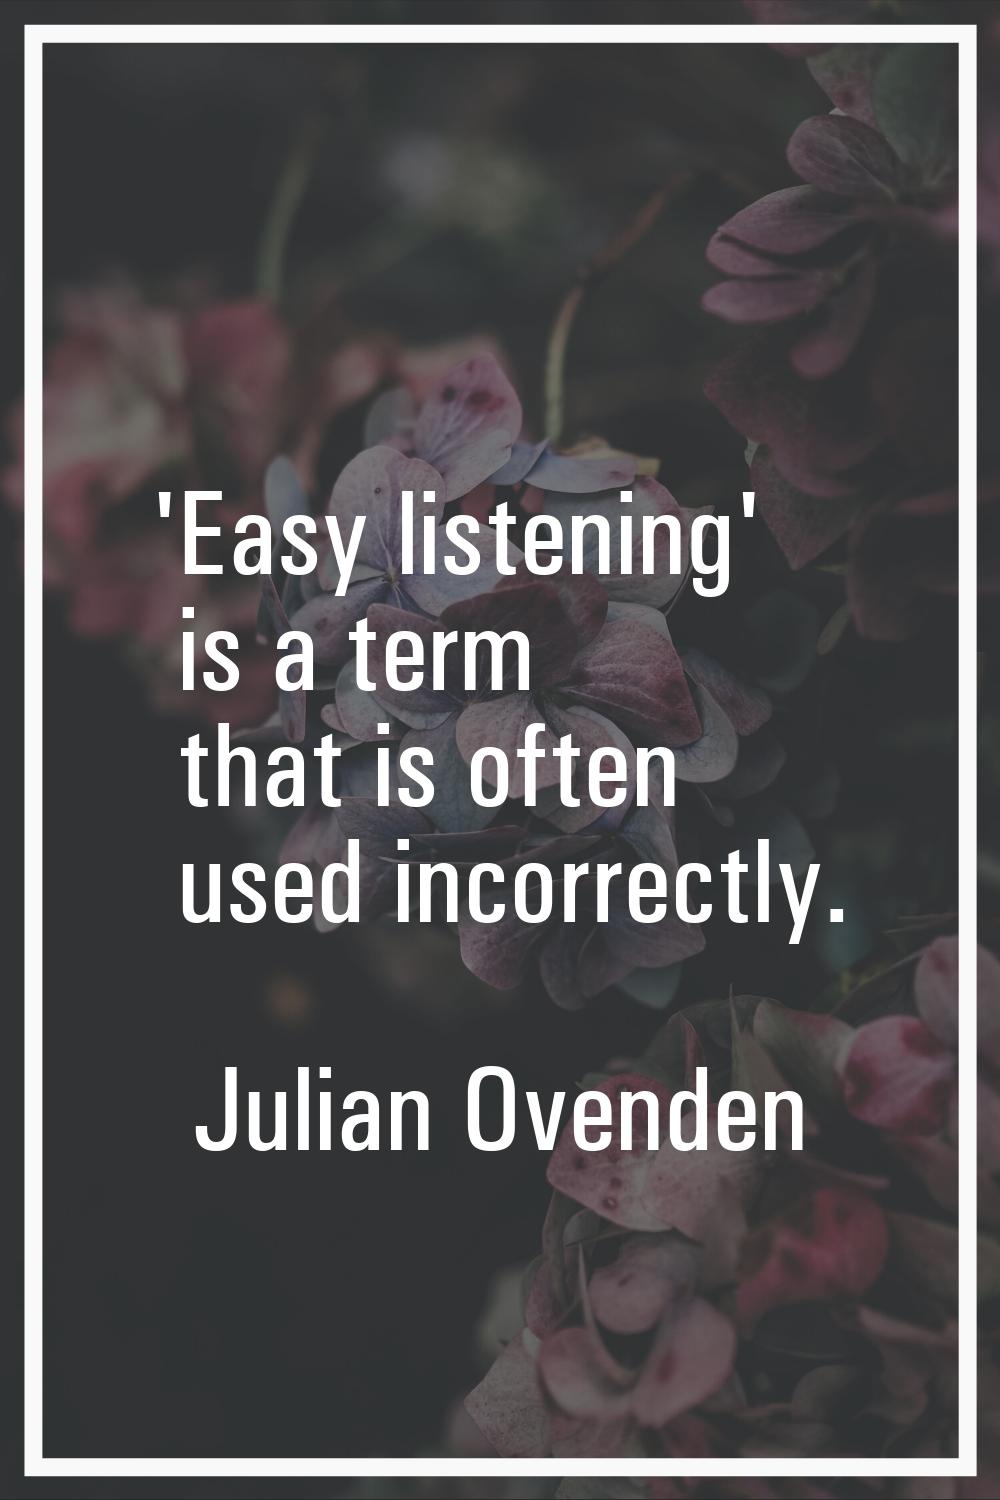 'Easy listening' is a term that is often used incorrectly.